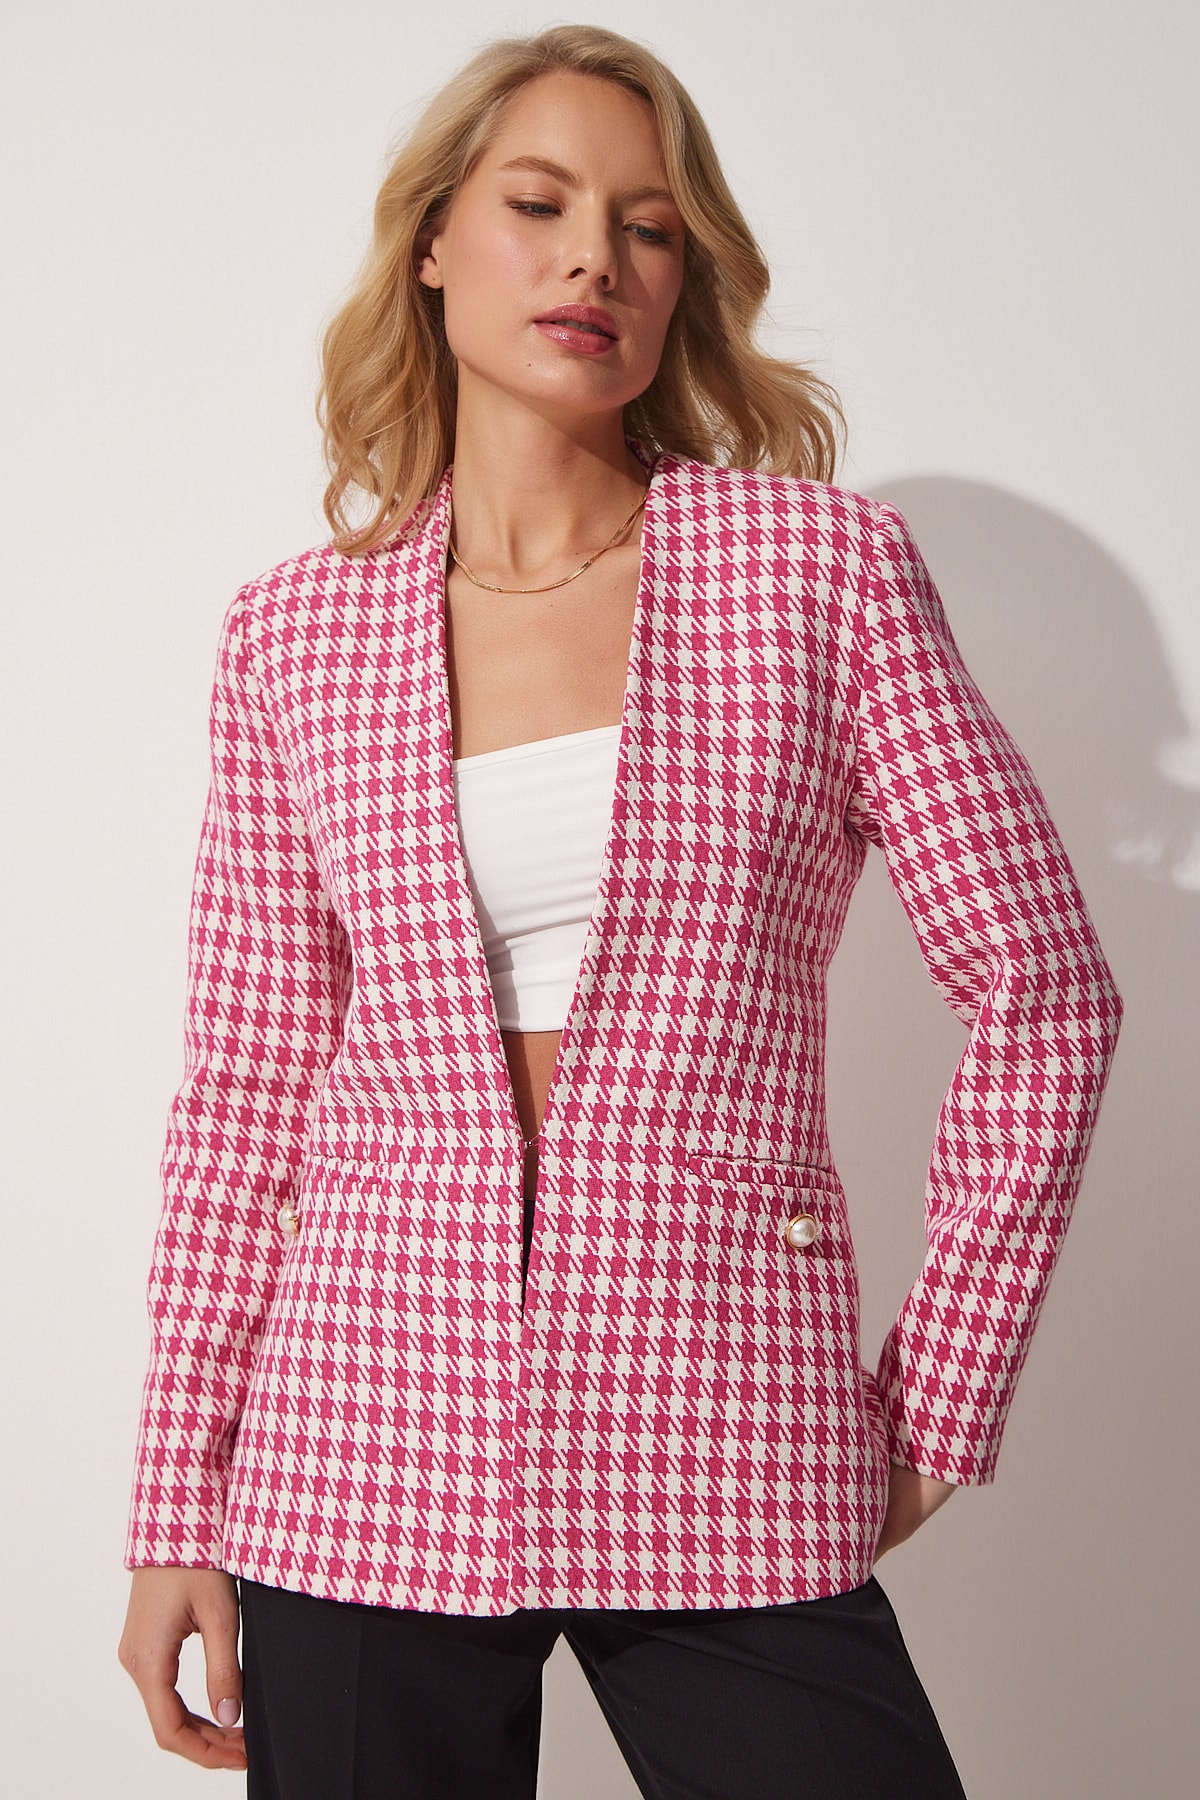 Happiness İstanbul Women's Pink Textured Houndstooth Patterned Blazer Jacket